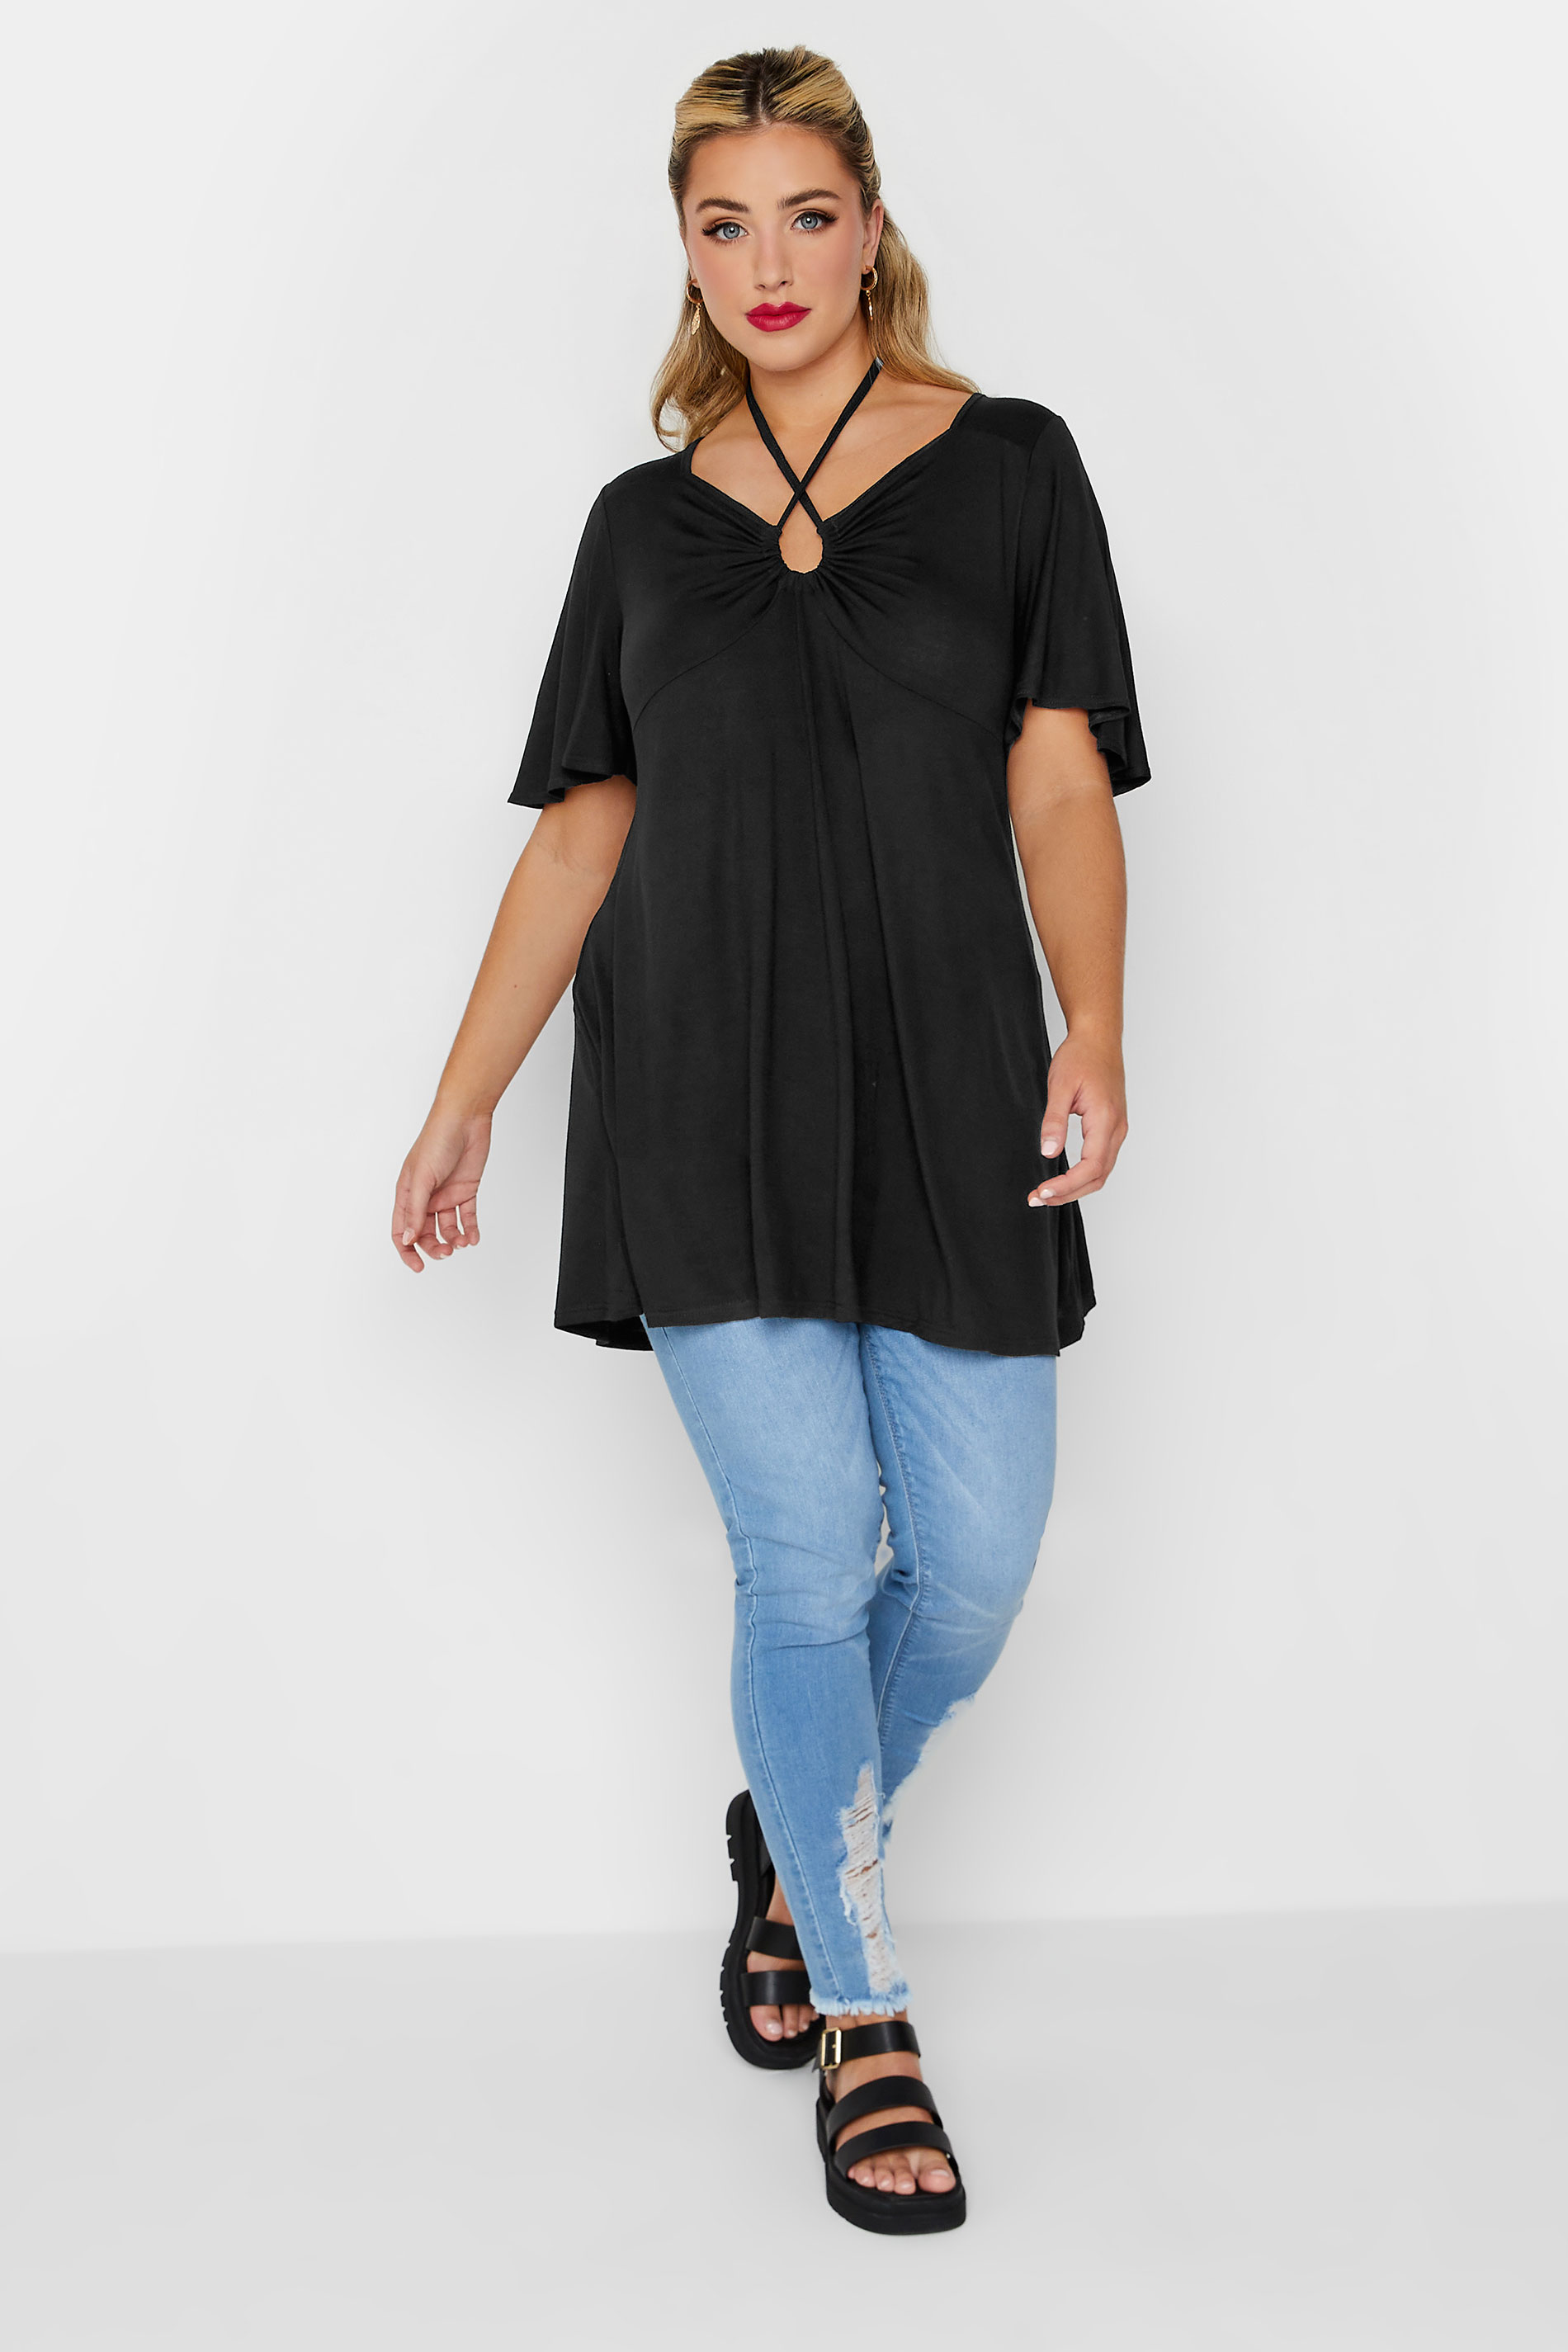 LIMITED COLLECTION Curve Plus Size Black Tie Neck Top | Yours Clothing  3